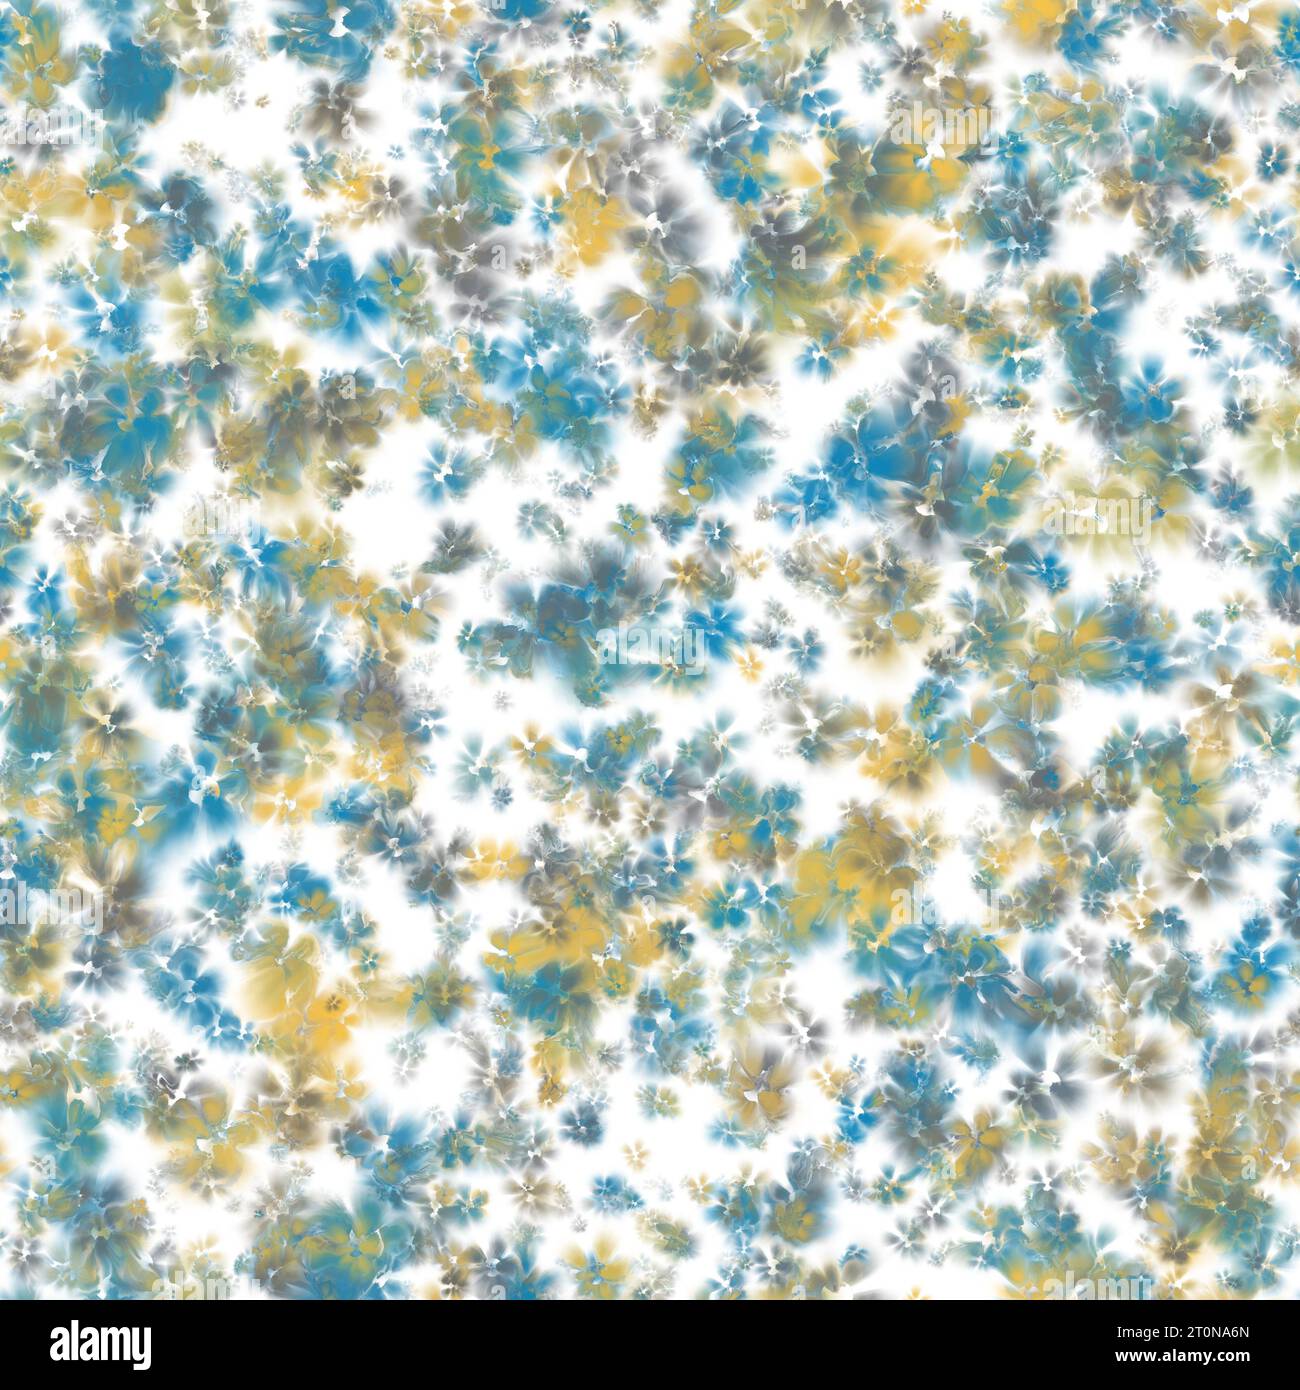 Blue, yellow and grey flowers with liquid texture. Seamless background. Stock Photo